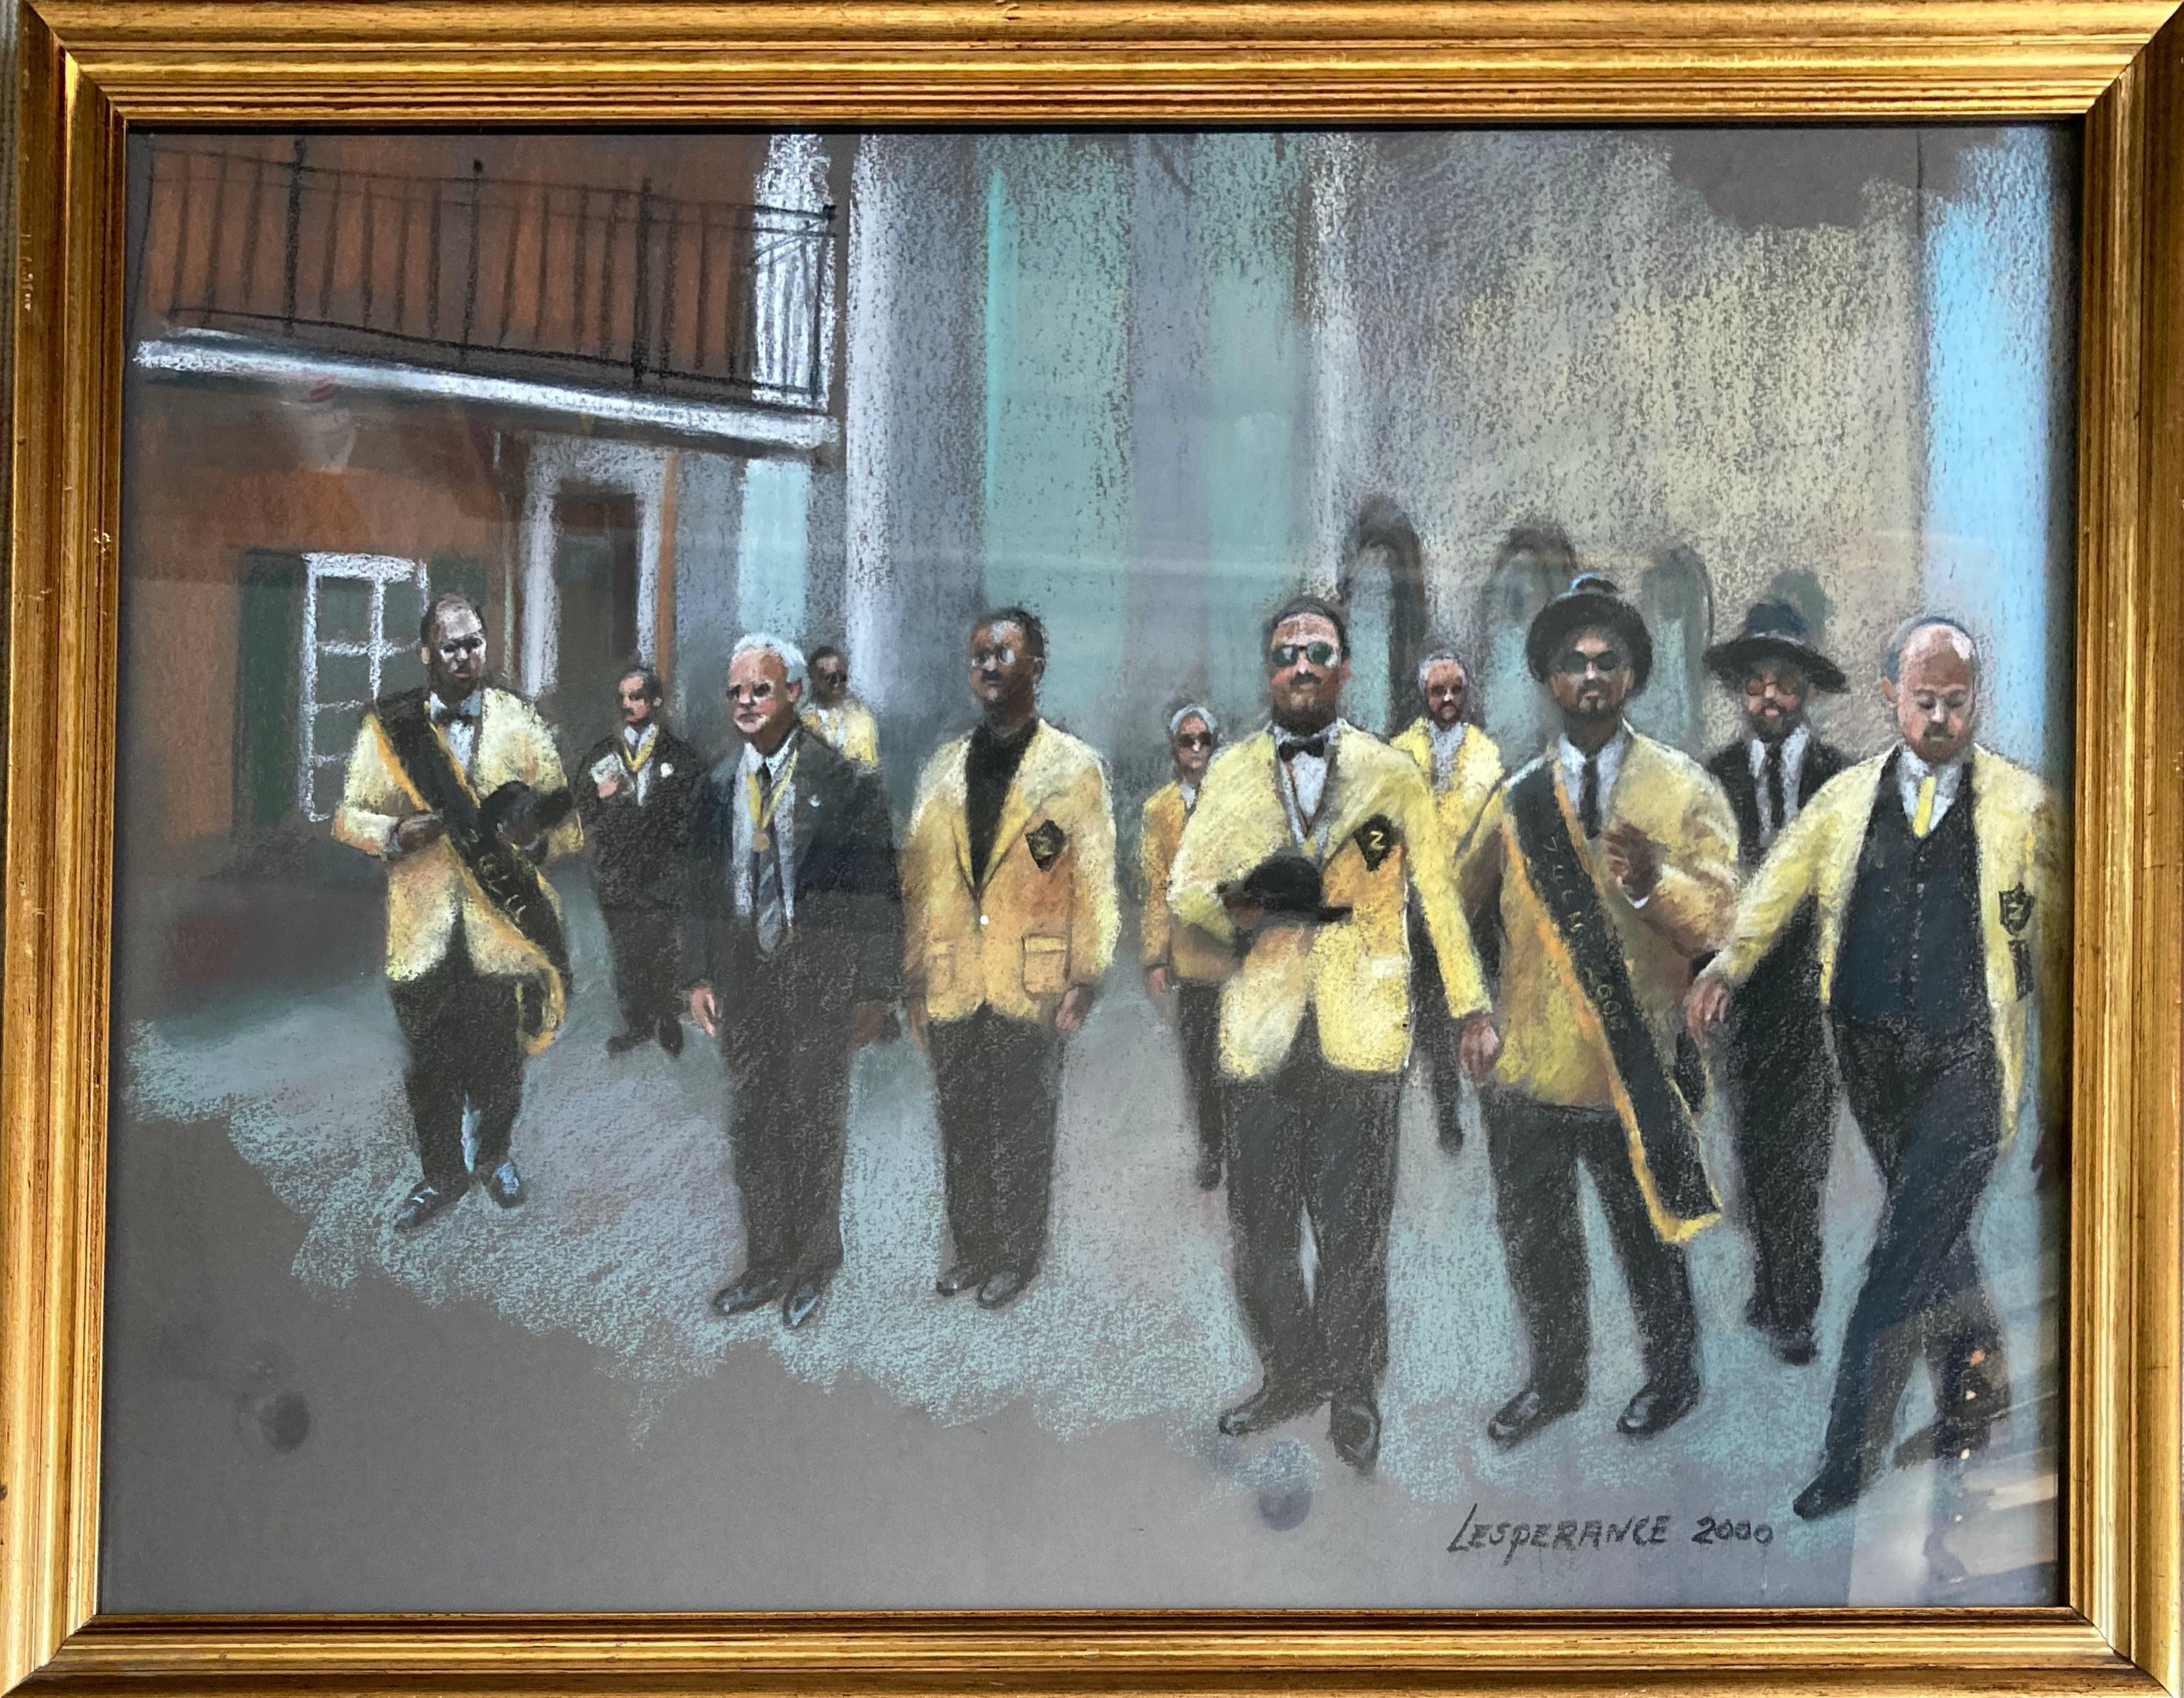 Linda Lesperance Portrait - "Dr. Moore Roy Glapion Funeral" - Framed Contemporary New Orleans Painting